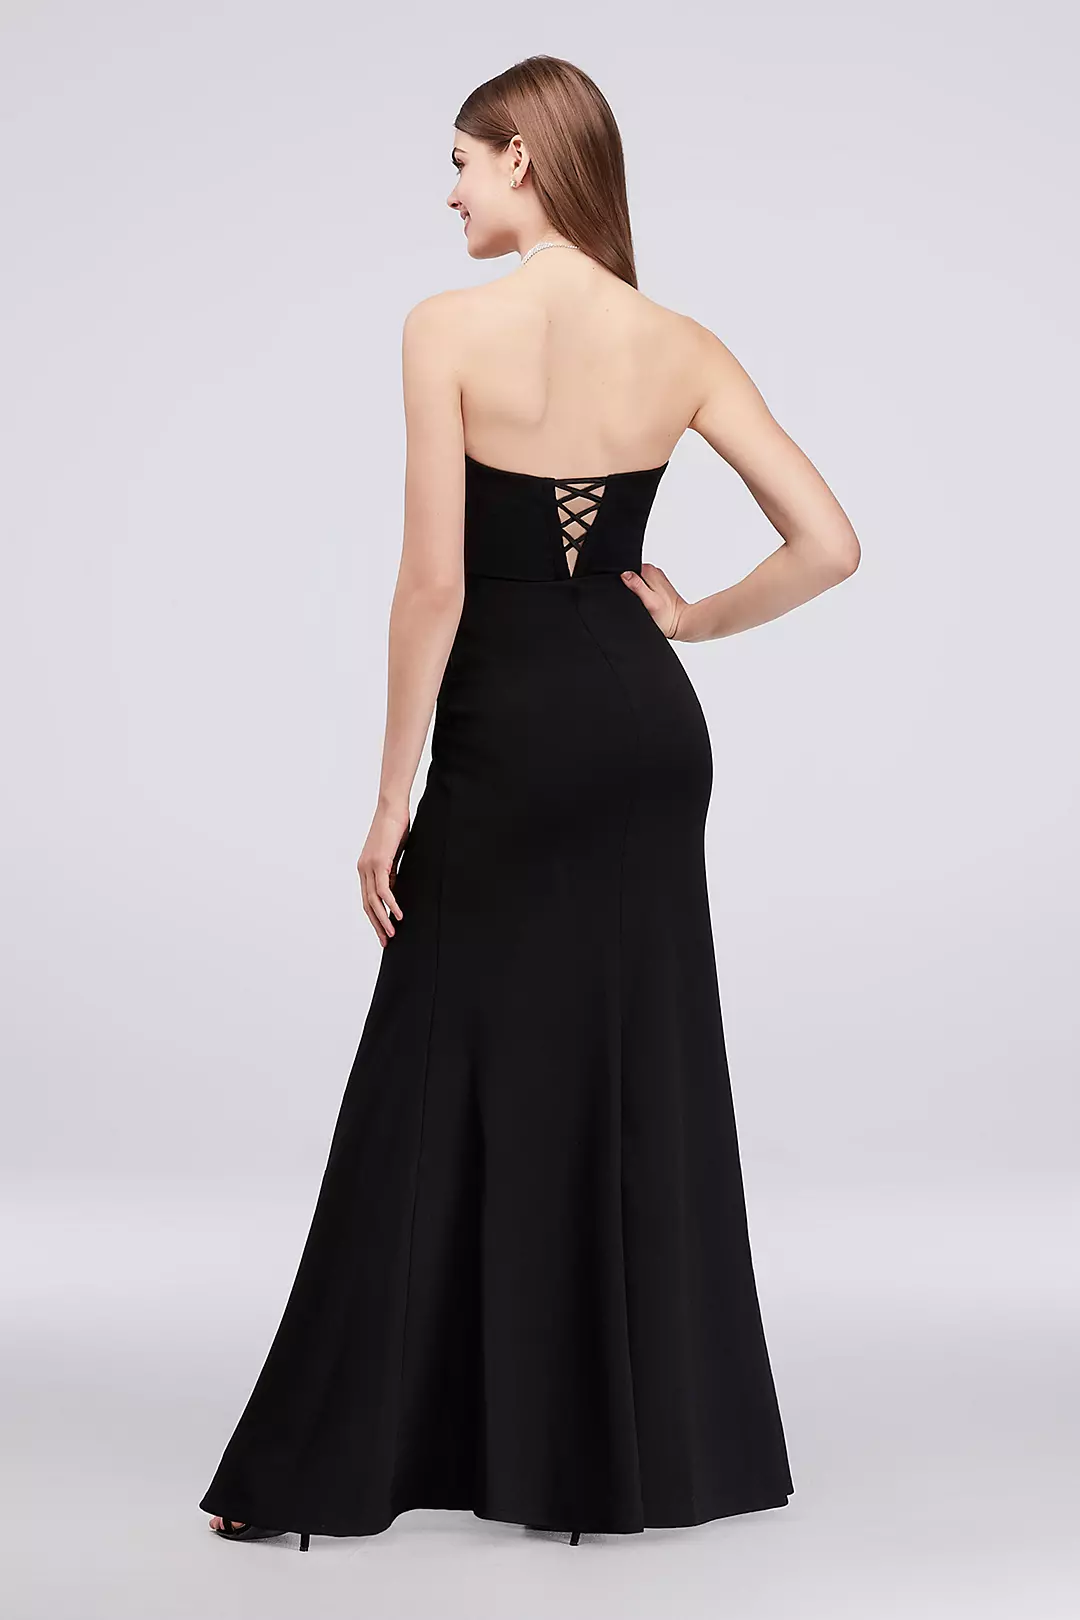 Crepe Mermaid Gown with Sweetheart Neckline Image 2